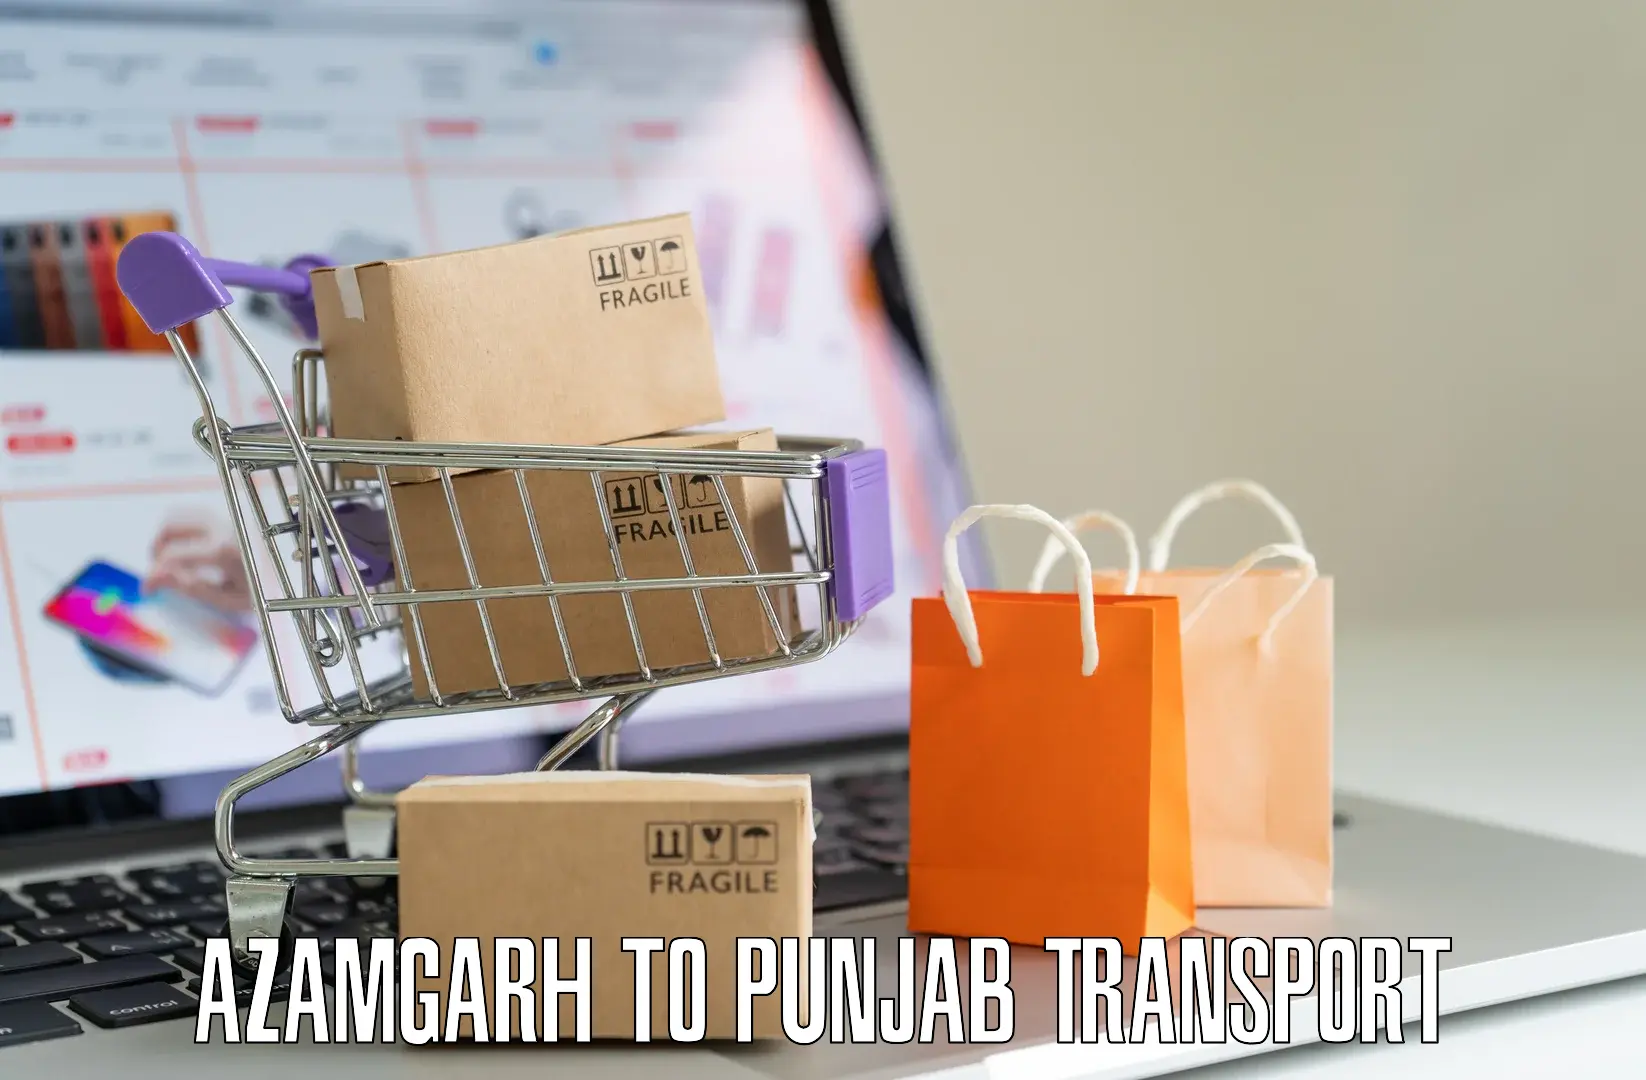 Transport shared services Azamgarh to Mohali